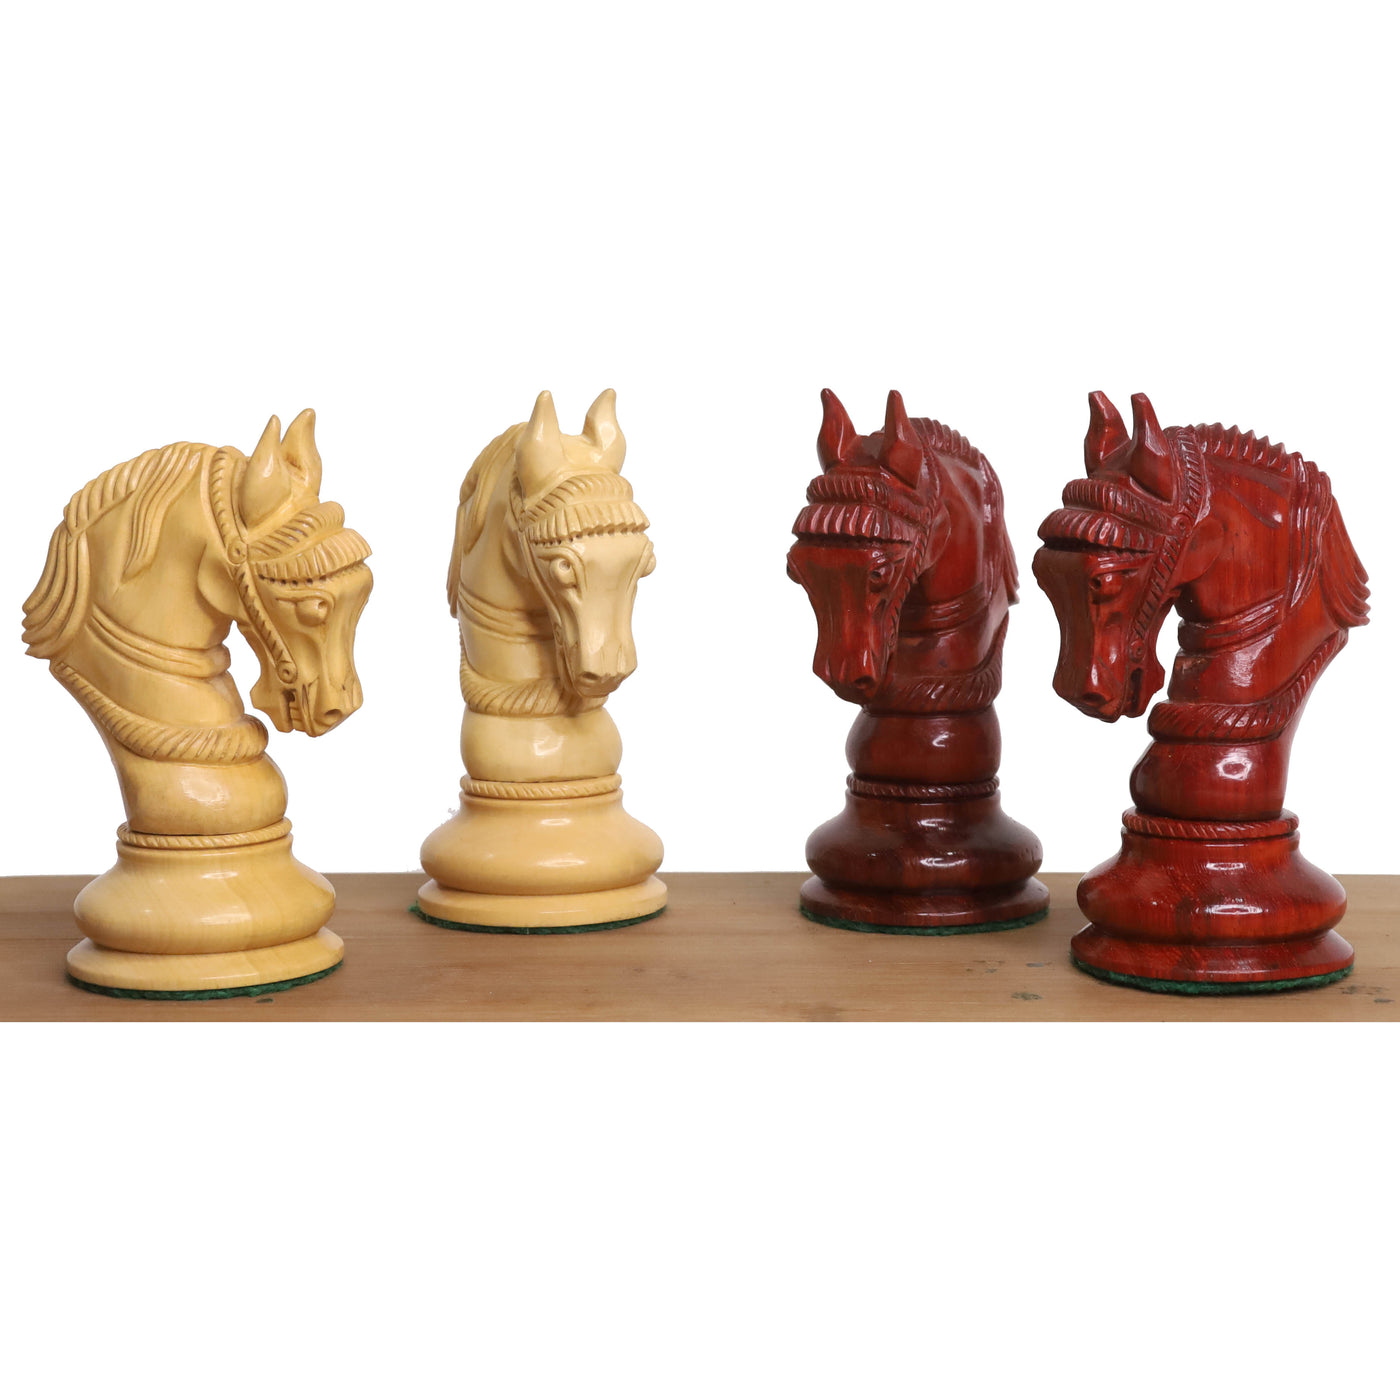 Slightly Imperfect 4.5" Imperator Luxury Staunton Chess Pieces Only Set - Bud Rosewood -Triple Weight